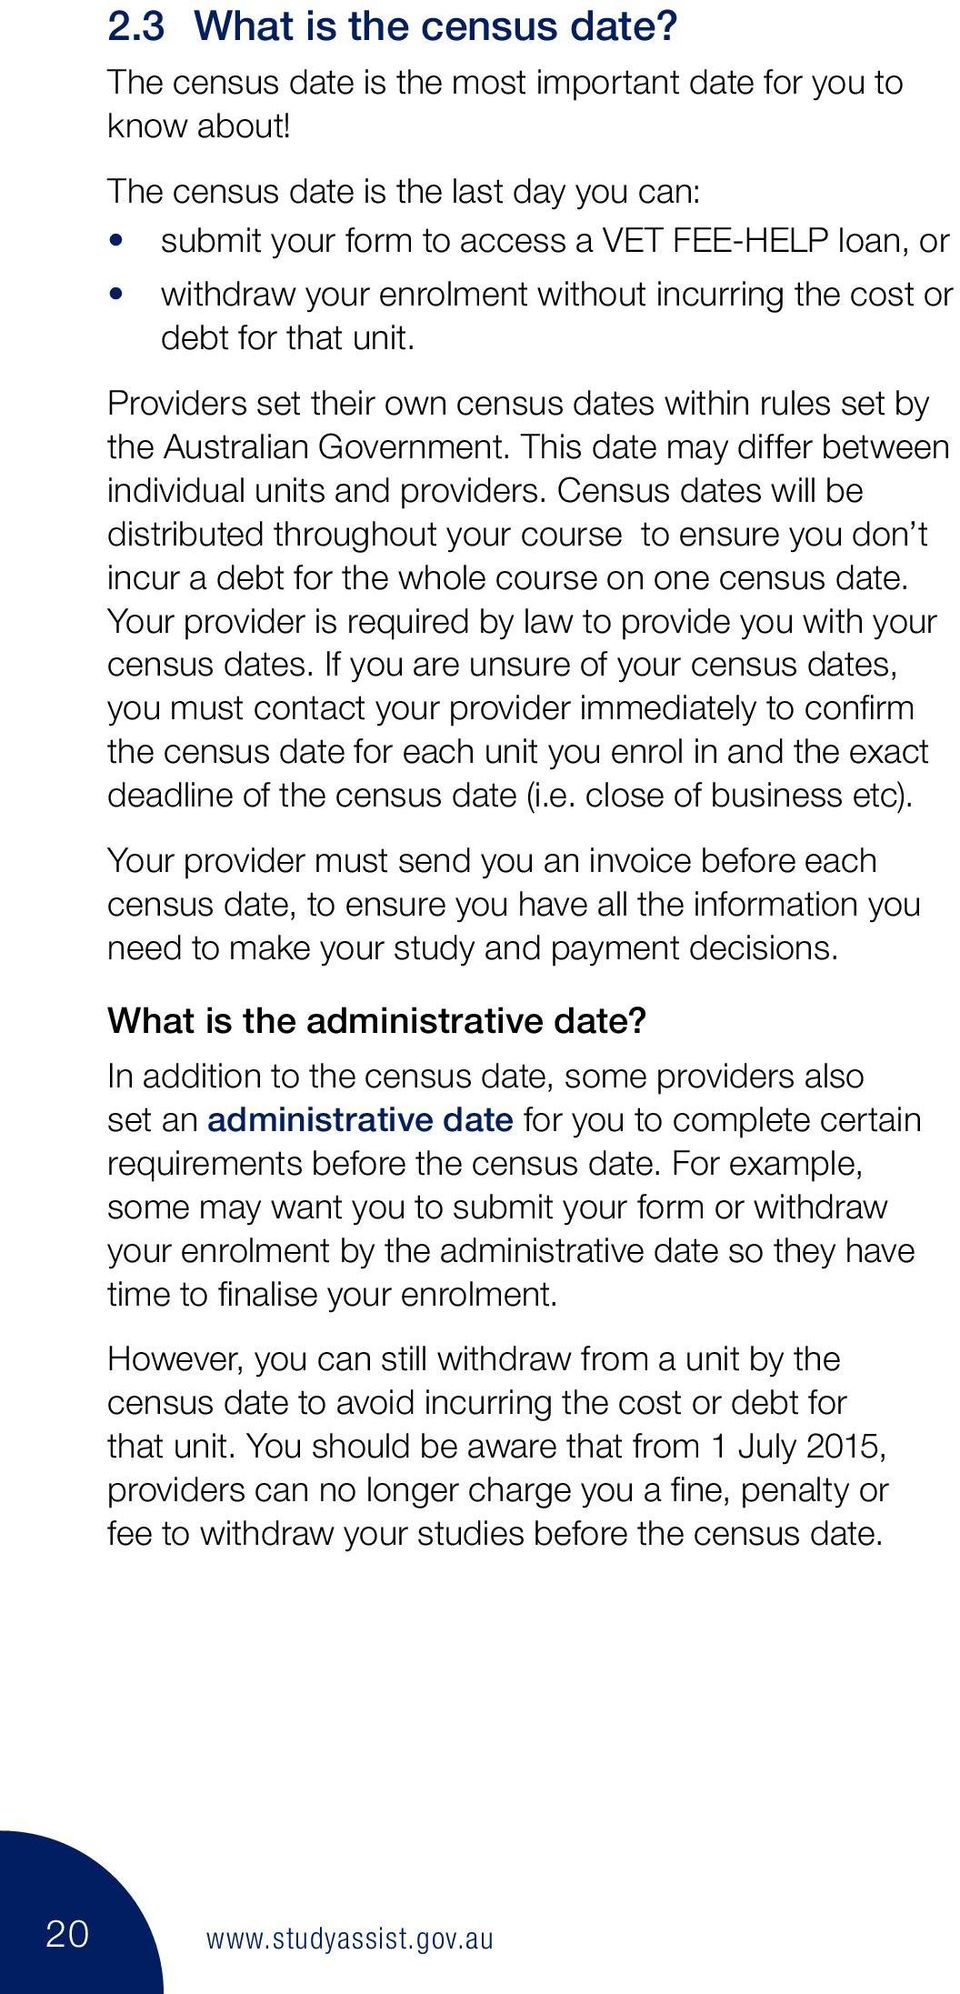 Providers set their own census dates within rules set by the Australian Government. This date may differ between individual units and providers.